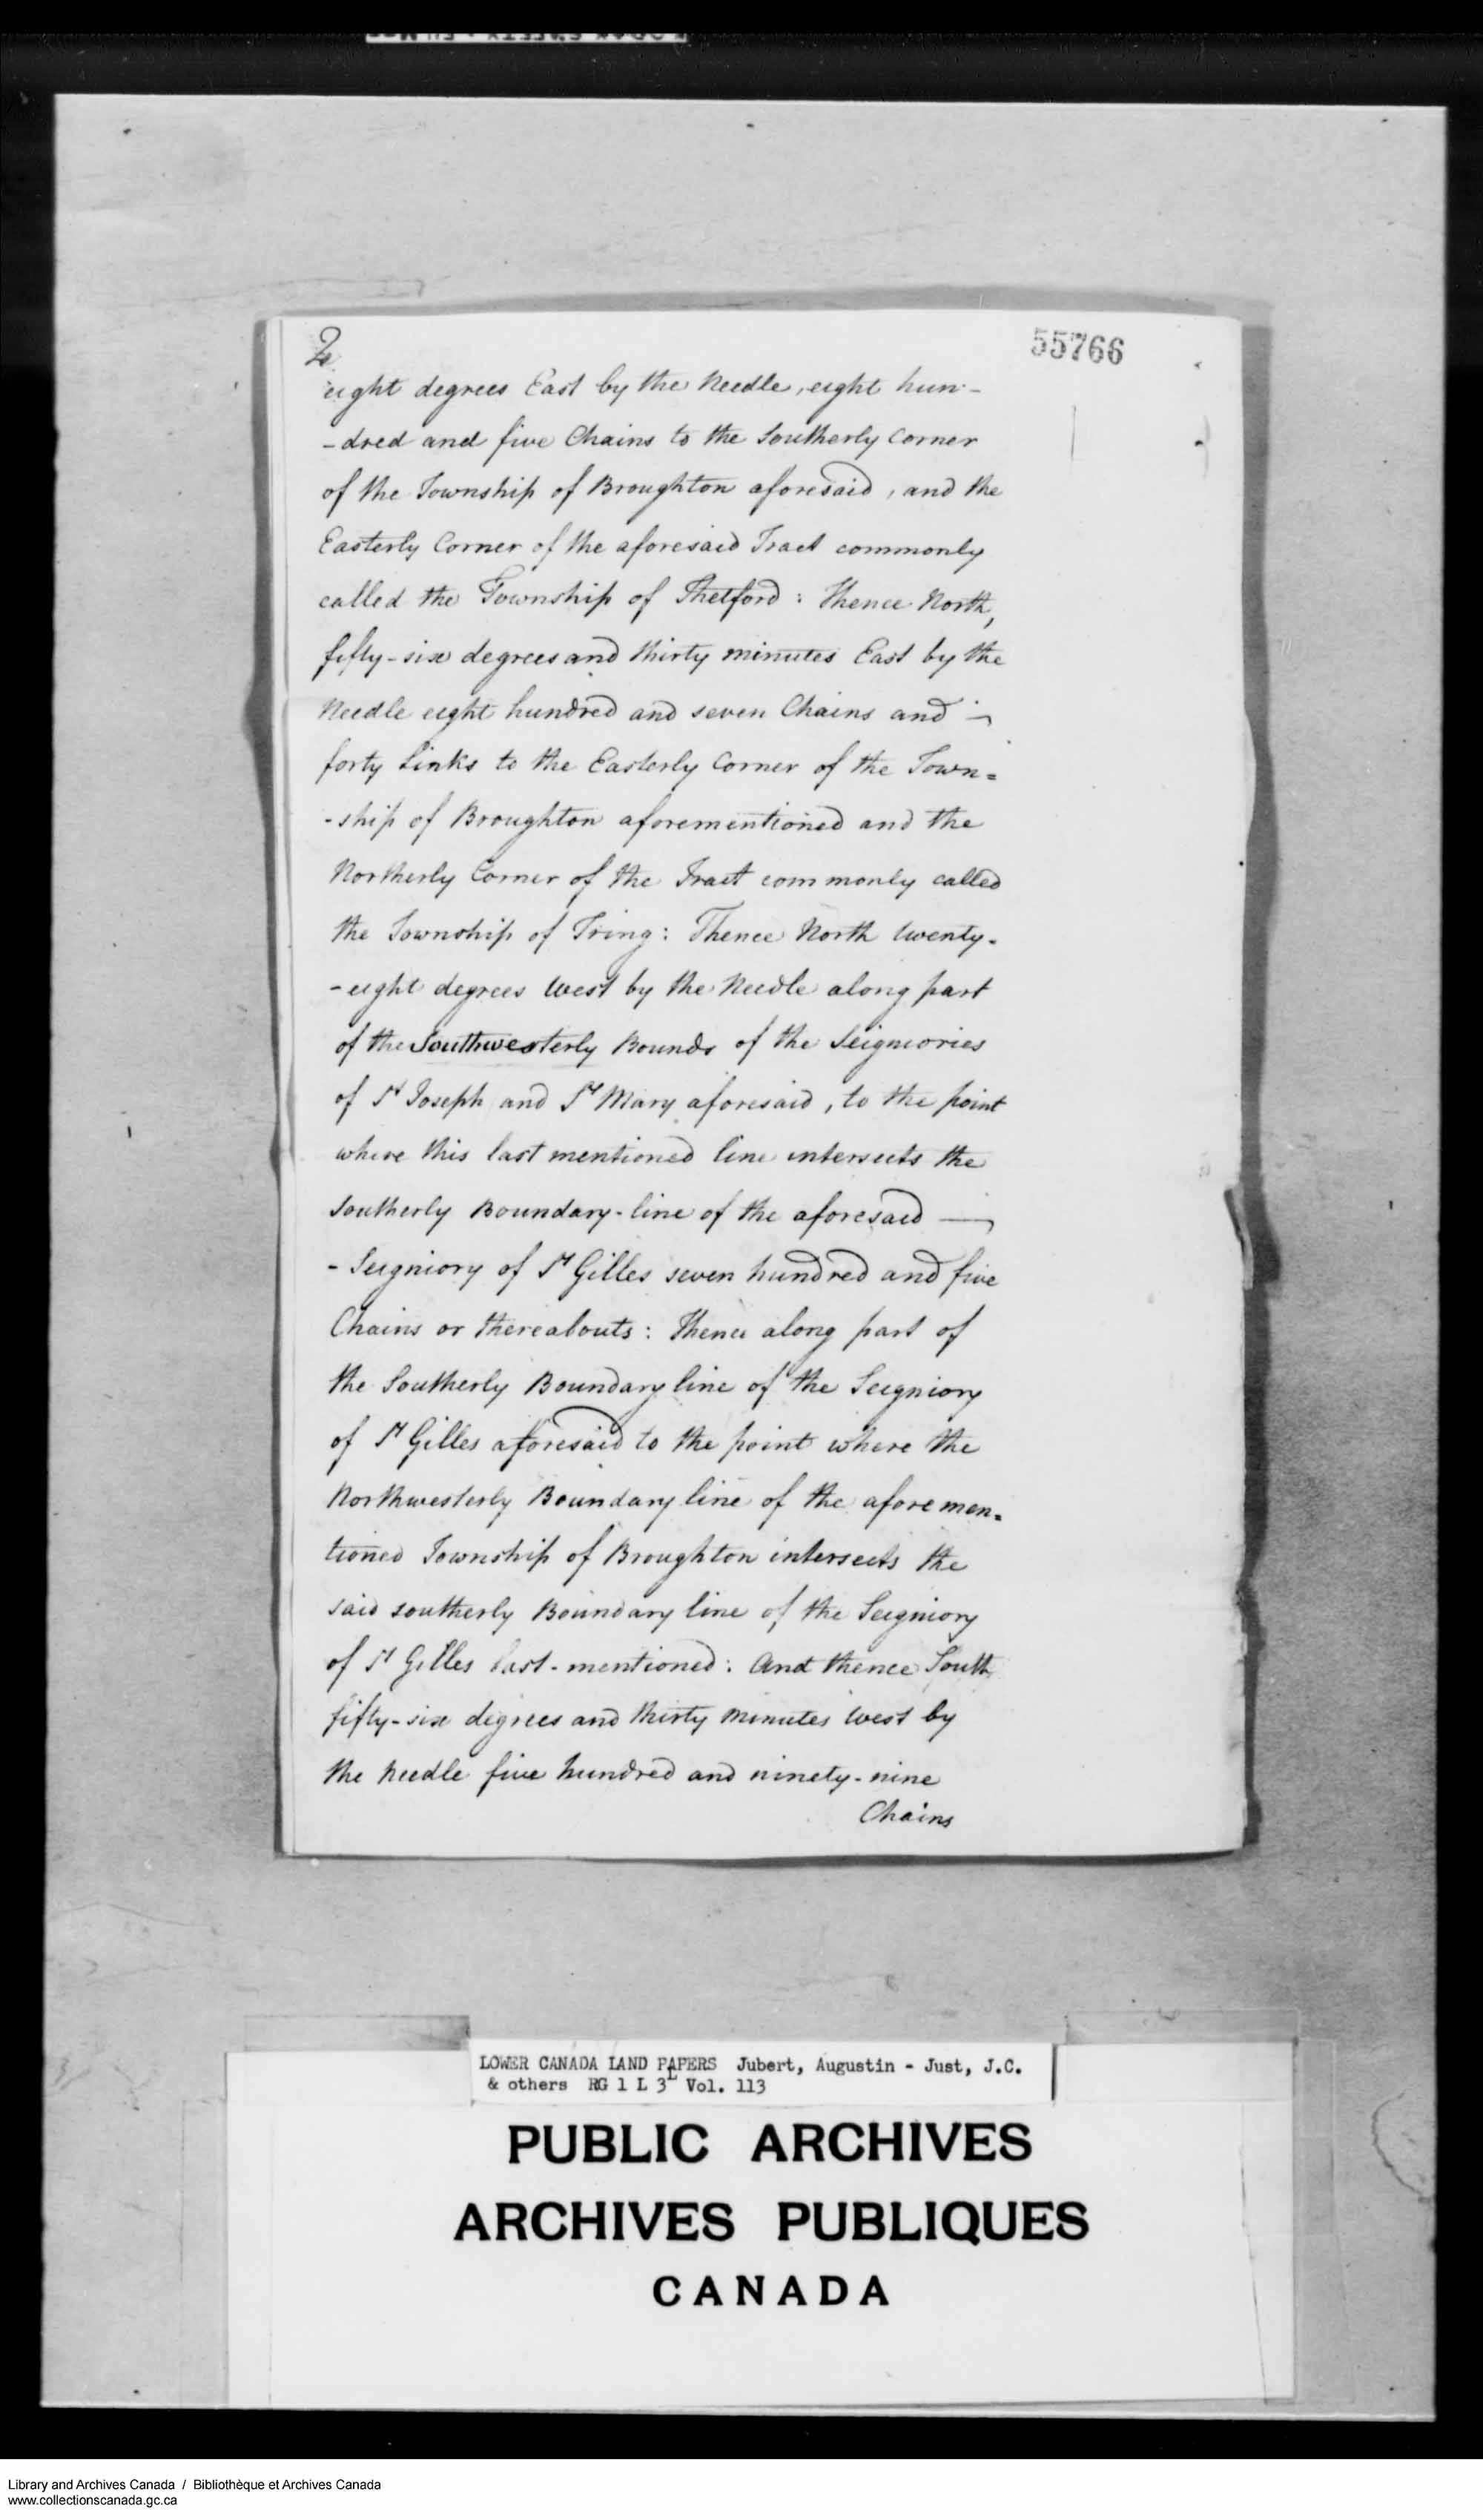 Digitized page of  for Image No.: e008700254